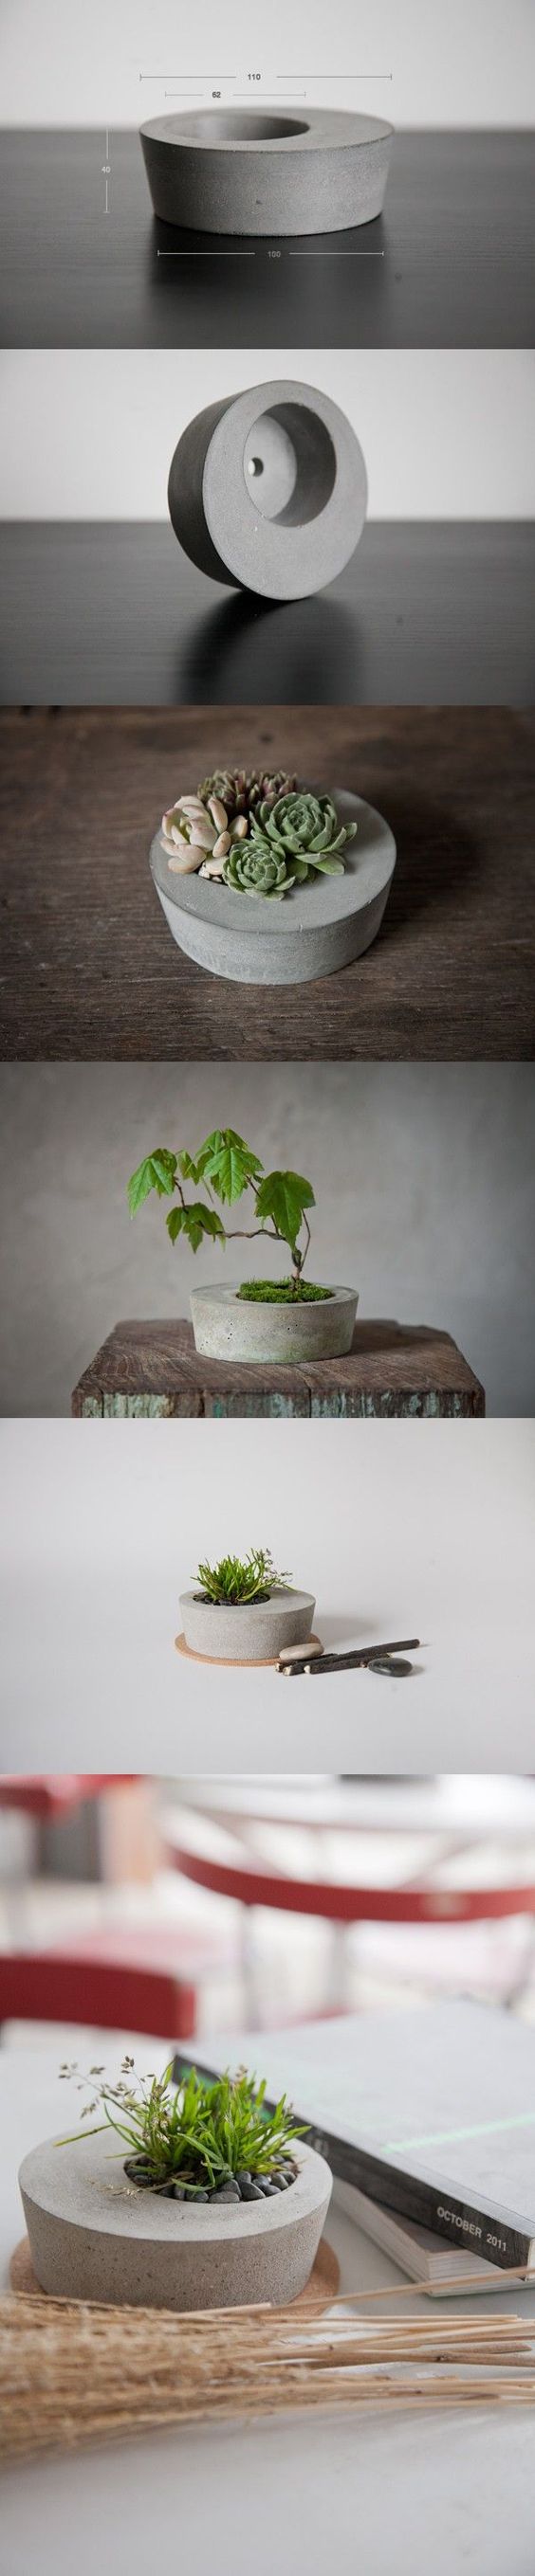 Modern And Easy: Contemporary DIY Cement Decor To Implement In Your